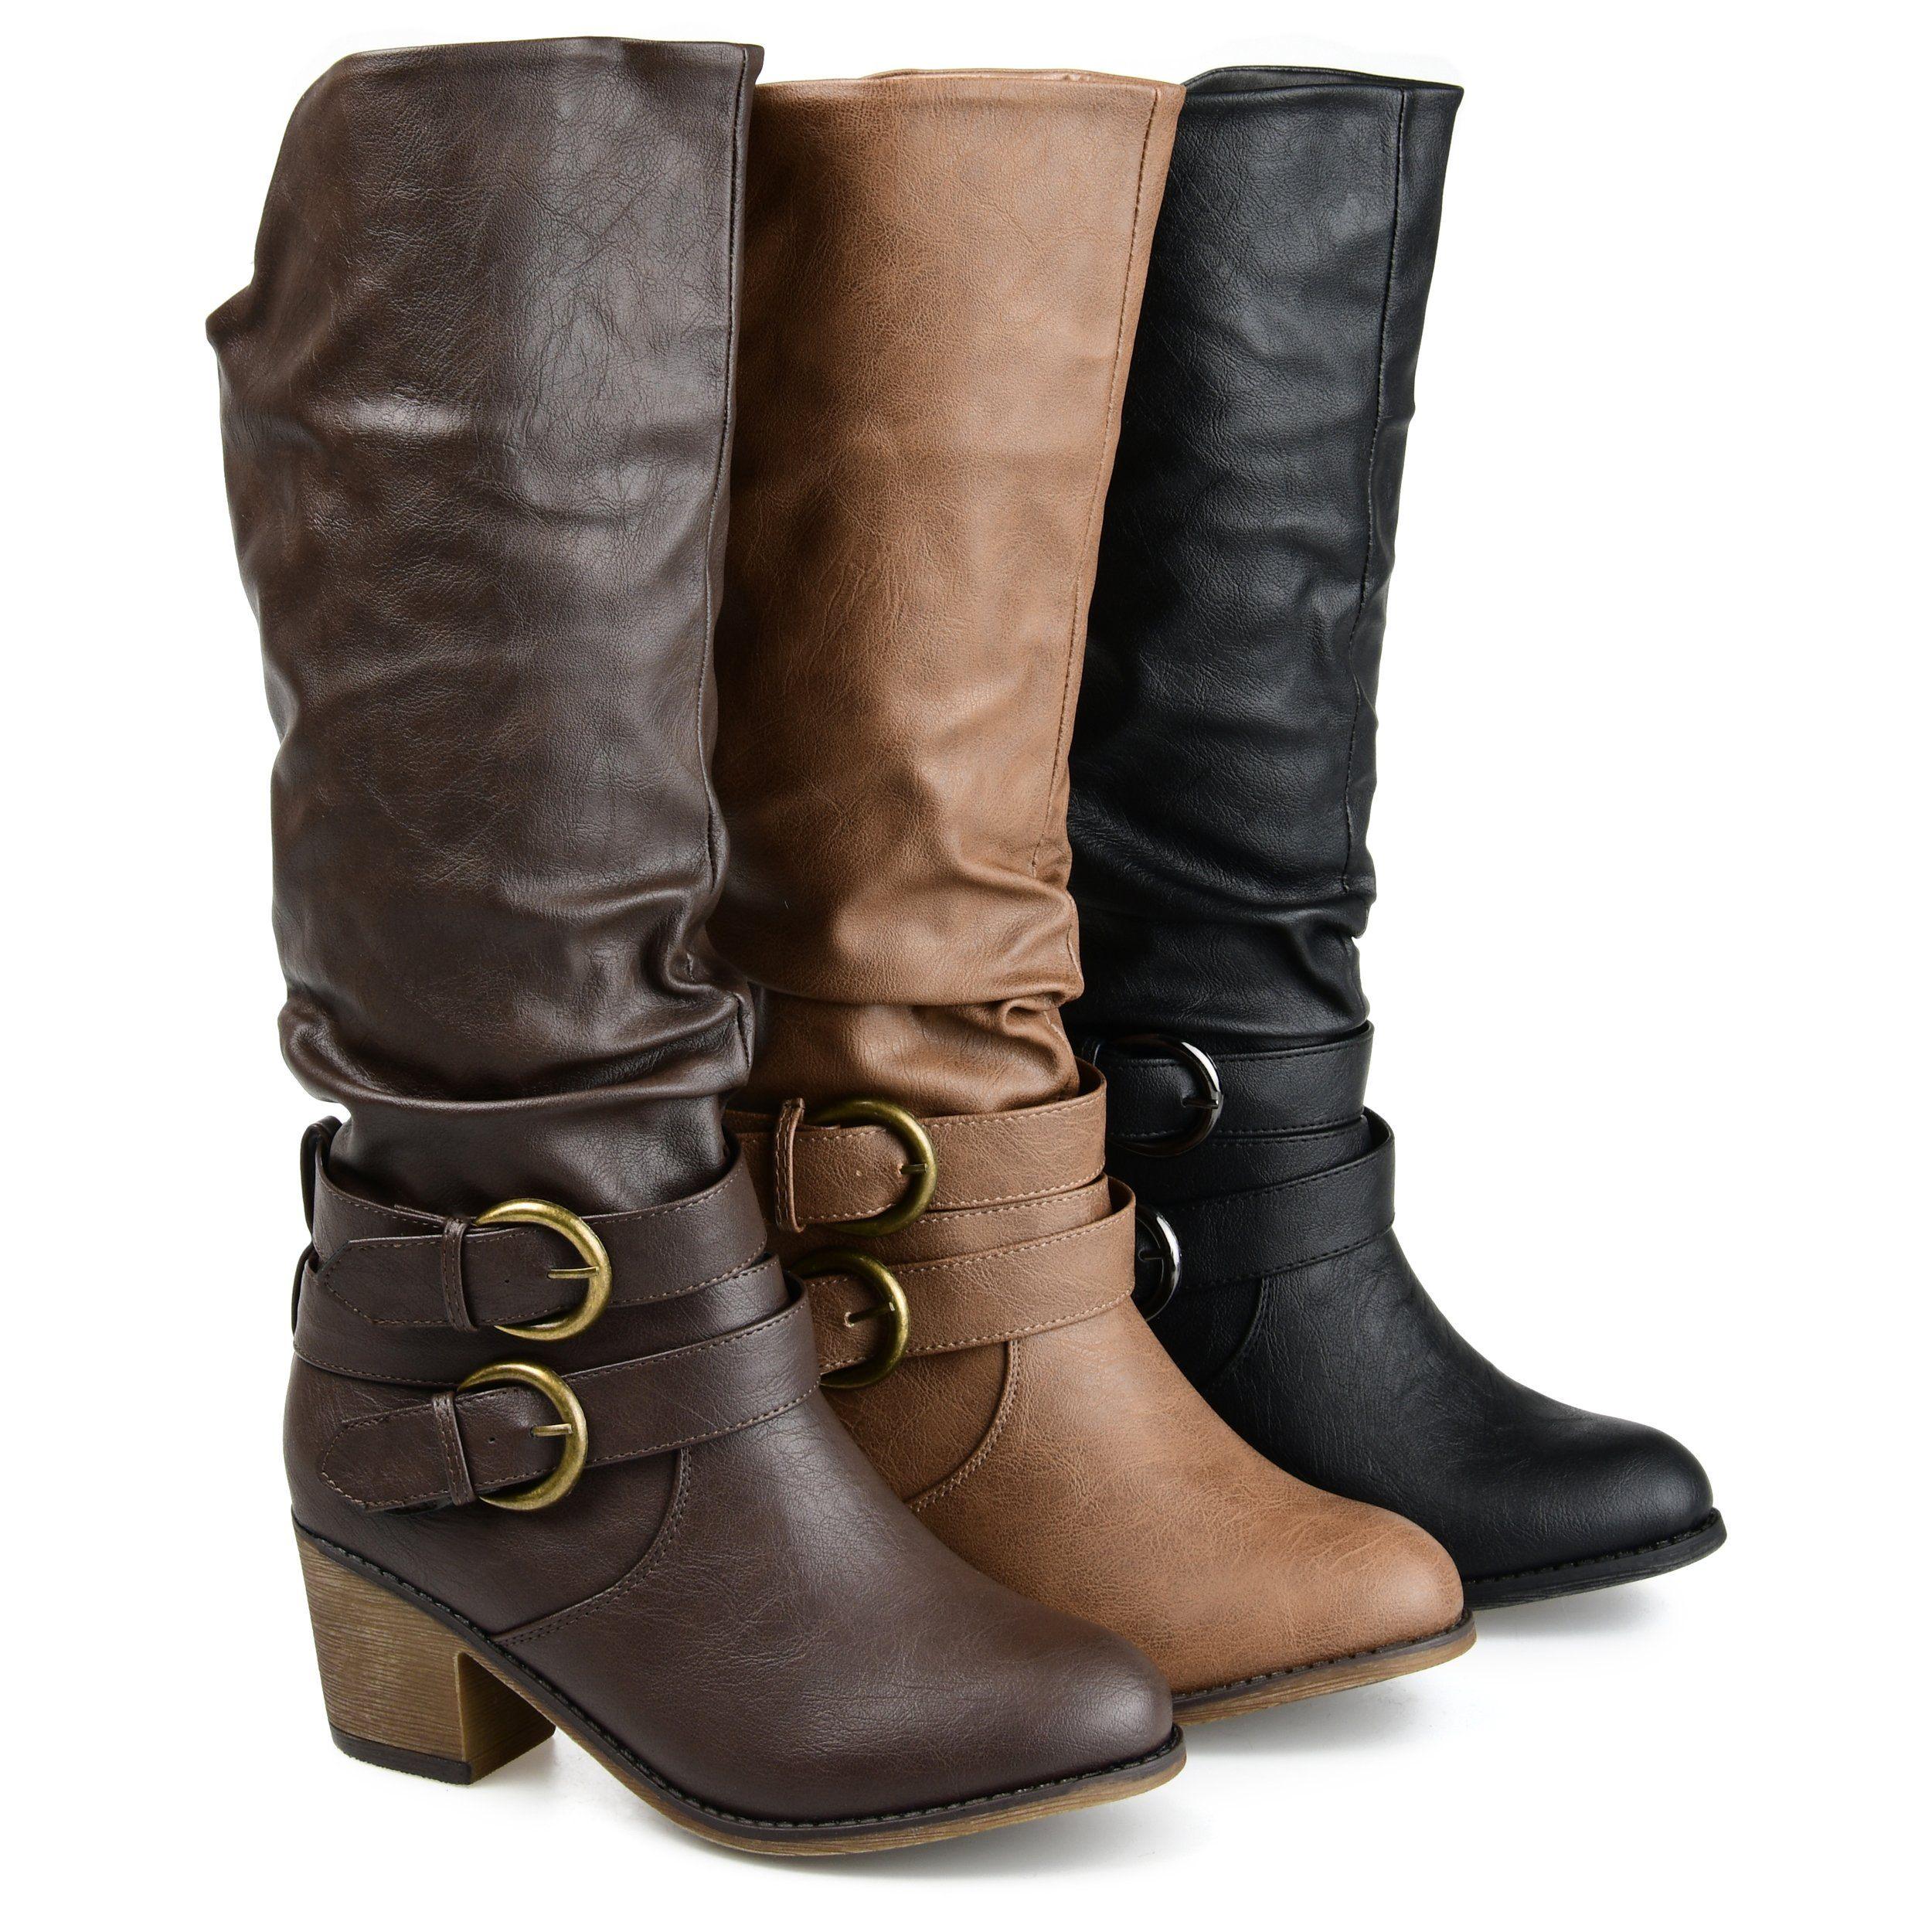 Late Wide Calf Boot, Women's Slouchy Boots